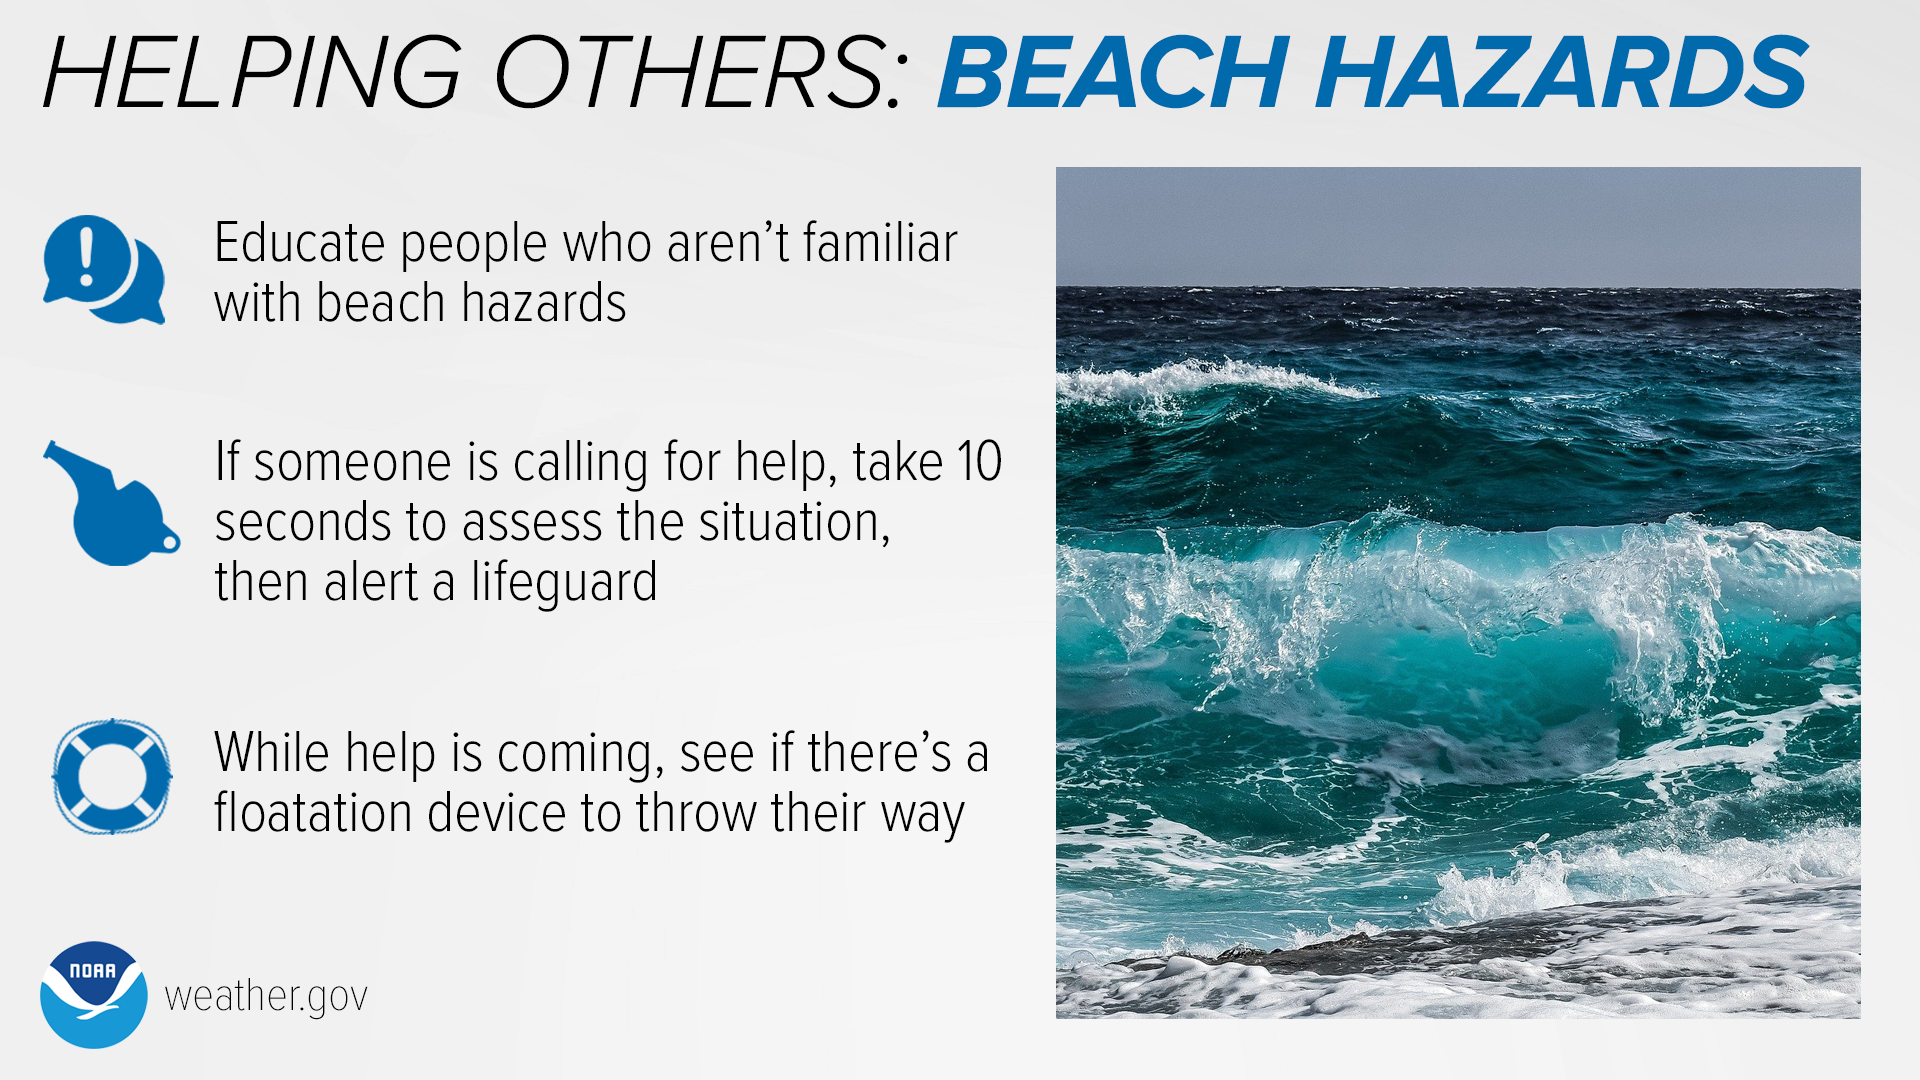 Helping Others: Beach Hazards. Educate people who aren’t familiar with beach hazards. If someone is calling for help, take 10 seconds to assess the situation, then alert a lifeguard. While help is coming, see if there’s a floatation device to throw their way. weather.gov